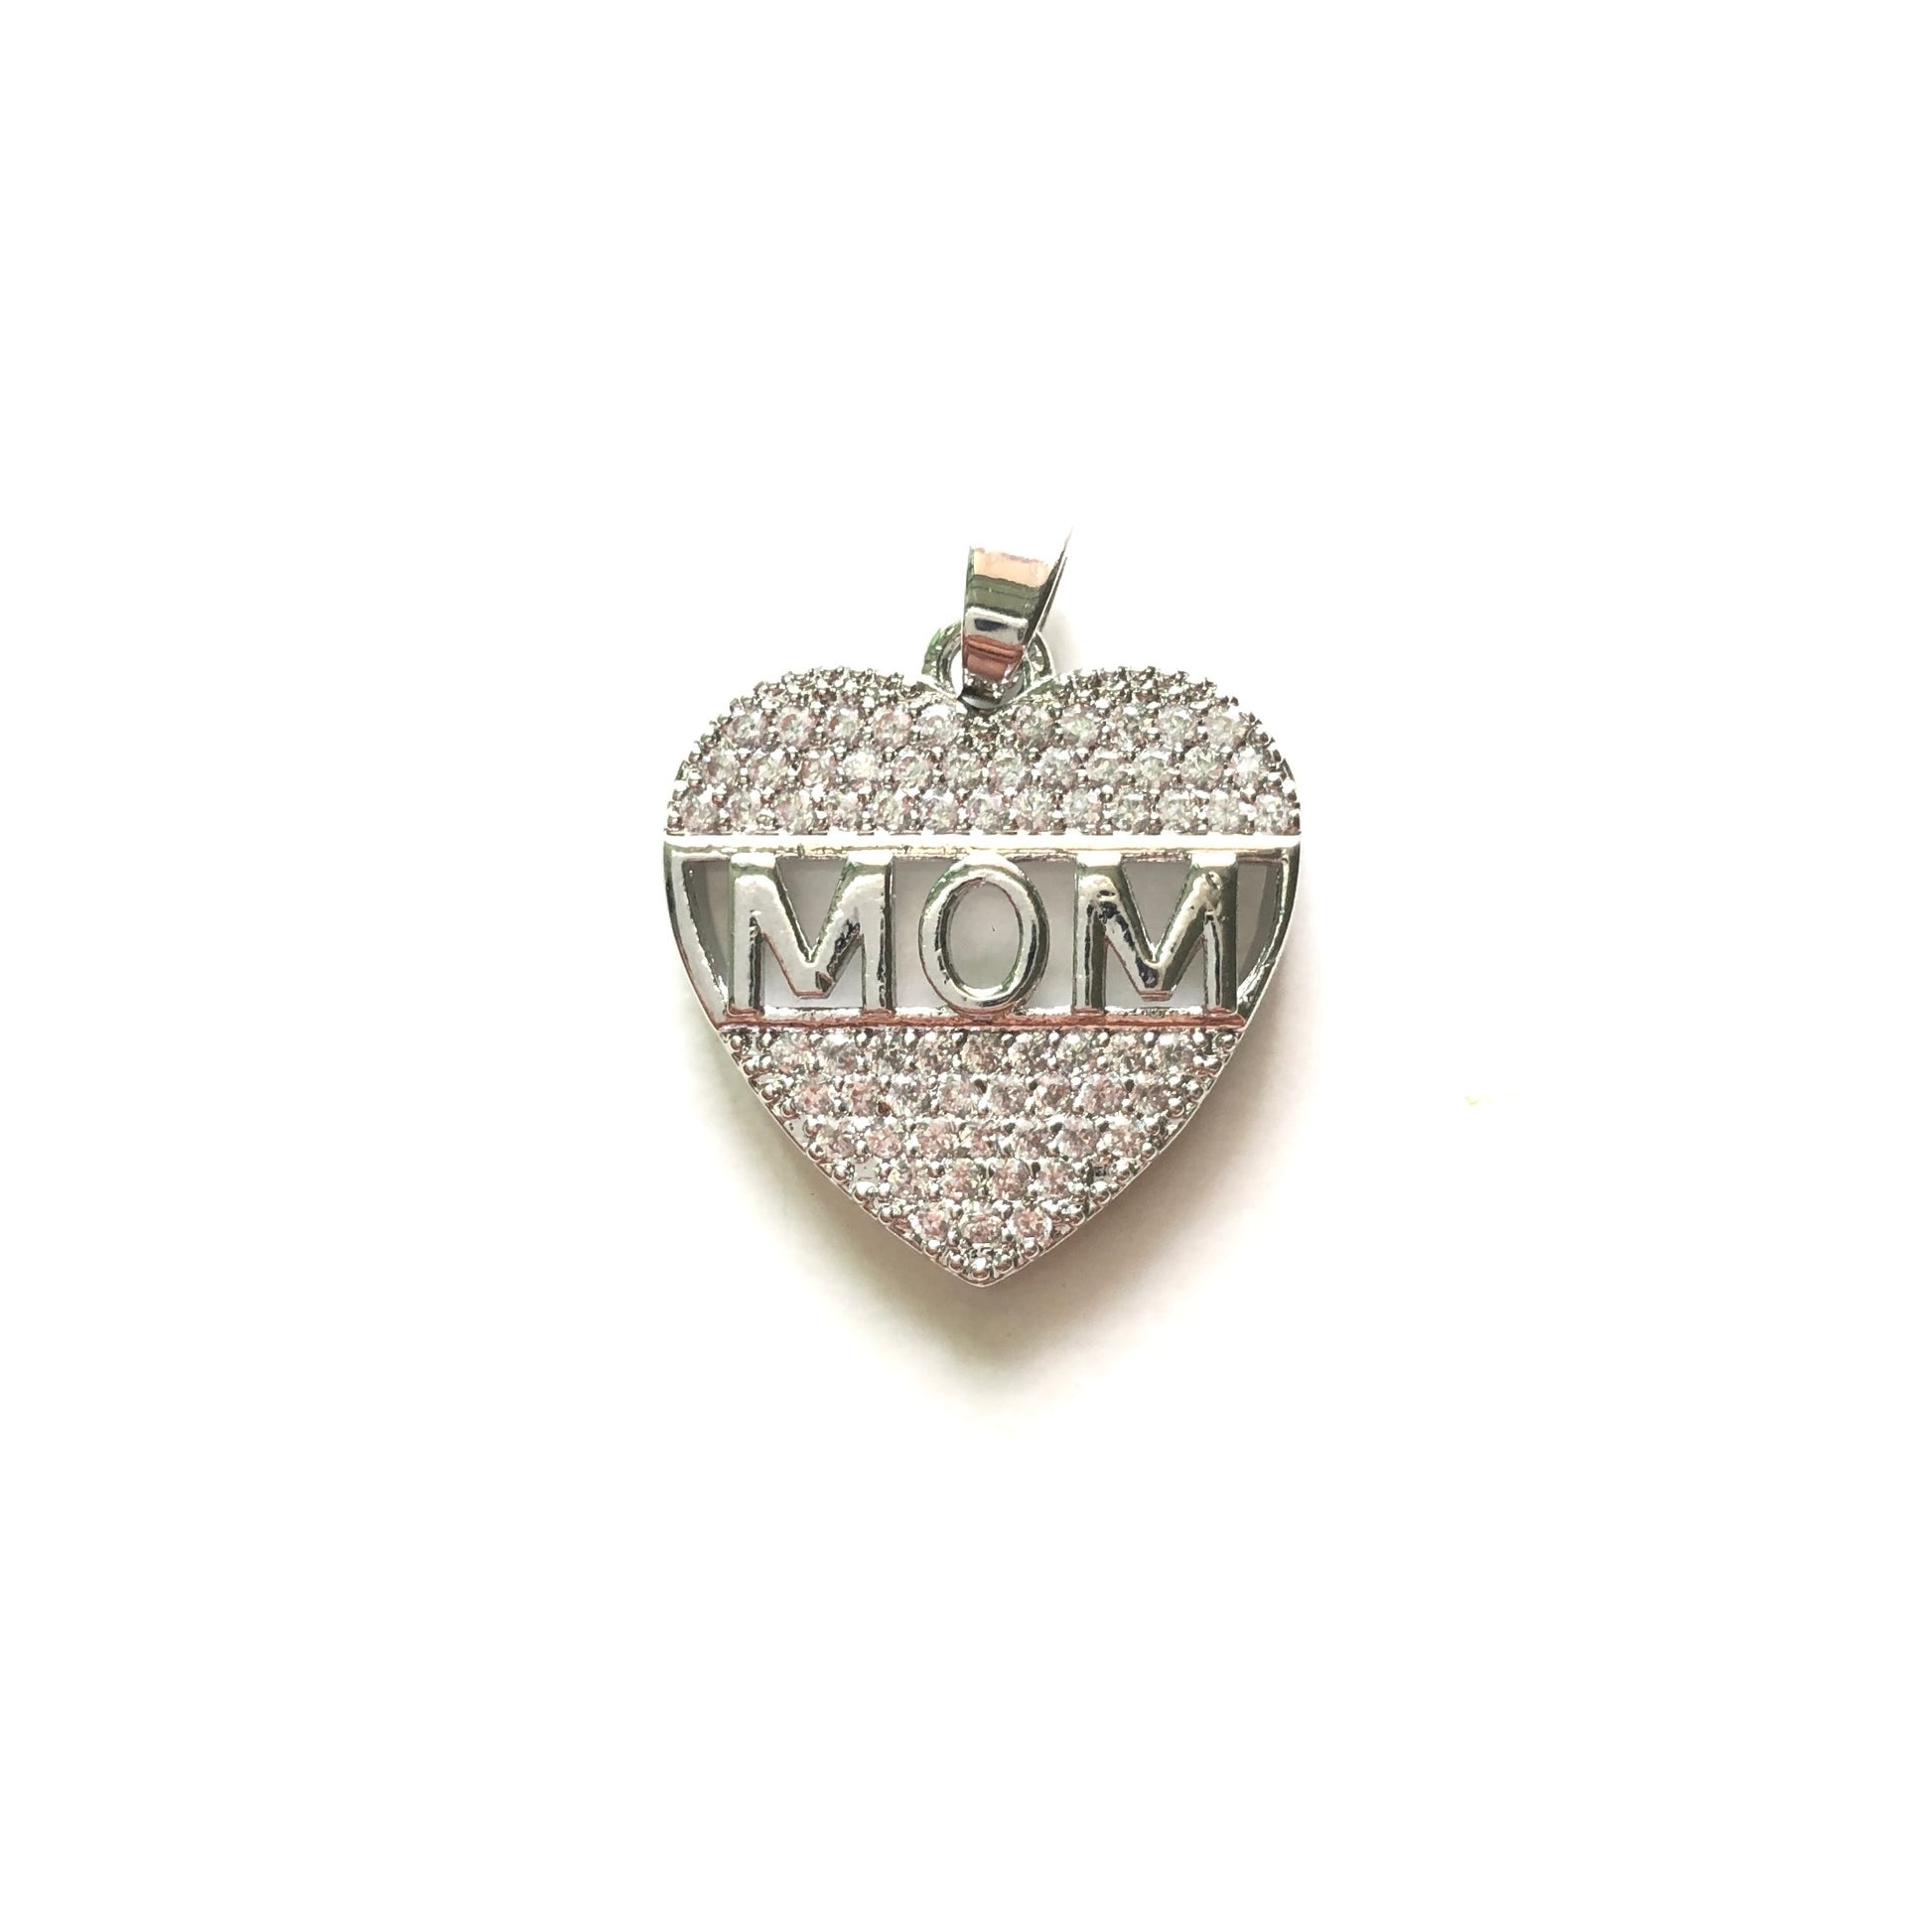 10pcs/lot 18*17mm CZ Paved Mom Charms for Mother's Day Silver CZ Paved Charms Hearts Mother's Day Charms Beads Beyond